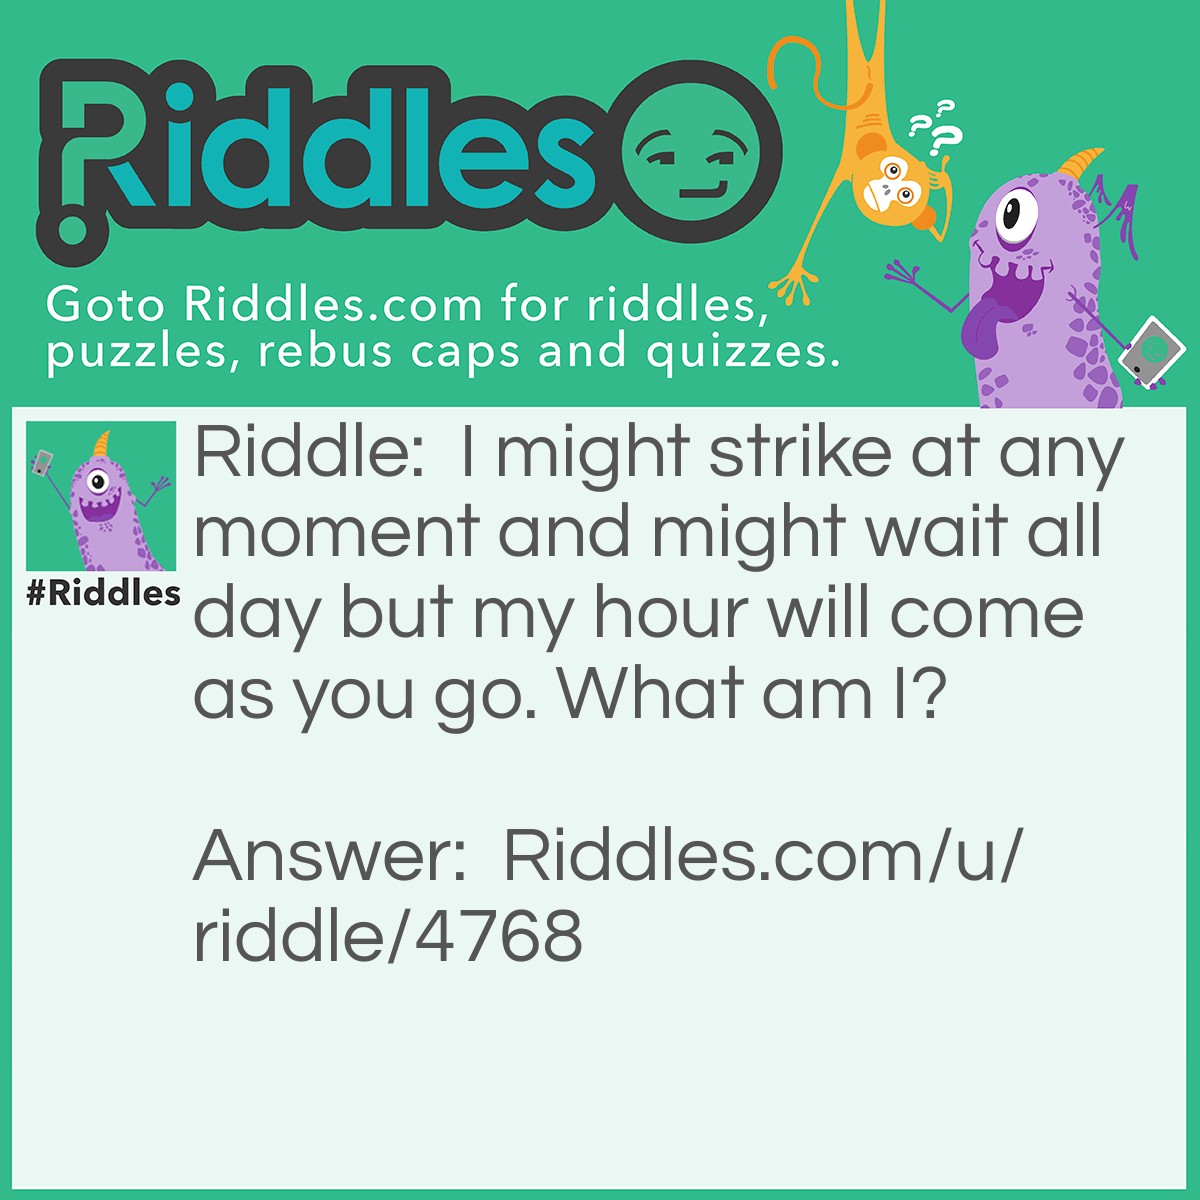 Riddle: I might strike at any moment and might wait all day but my hour will come as you go. What am I? Answer: Death.